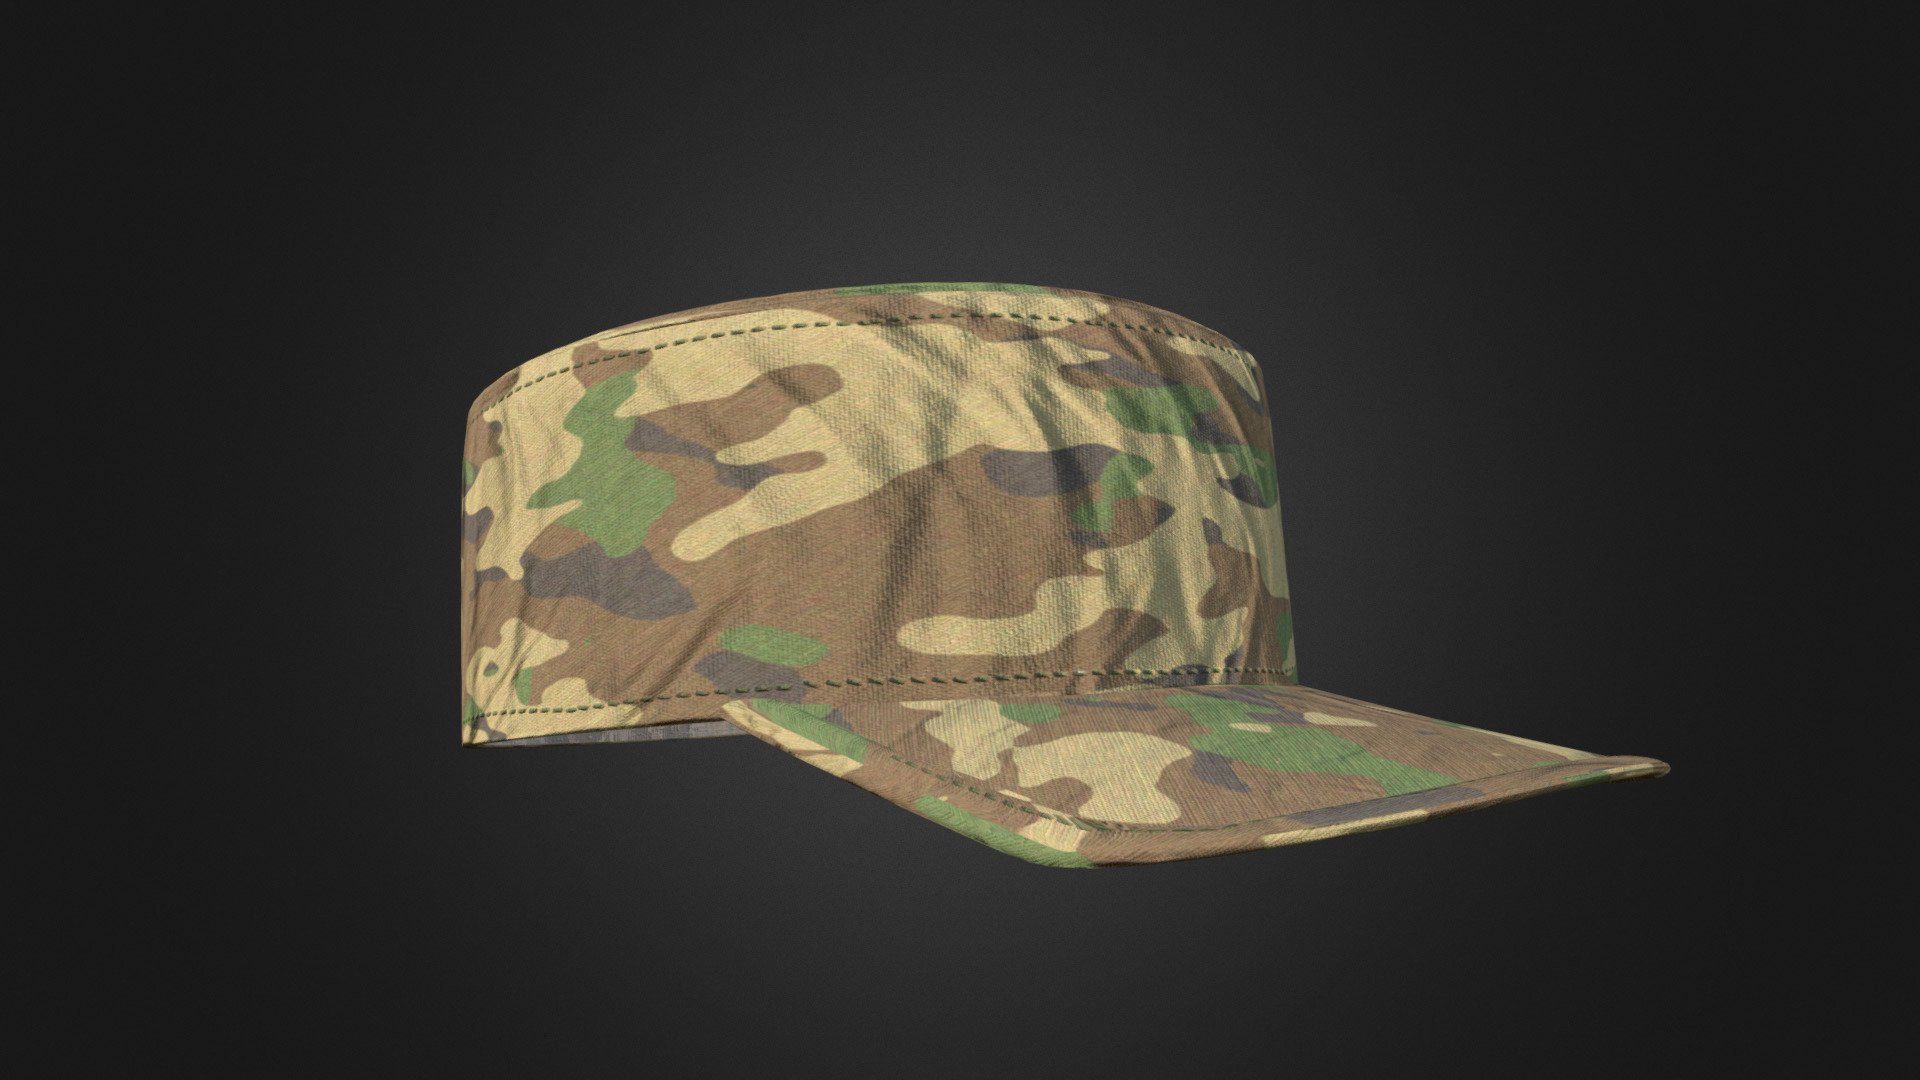 This Military hat is roblox commission project

Software: Blender and Substance Painter

Duration: 2 Days - Military Cap - 3D model by Muhawow 3d model